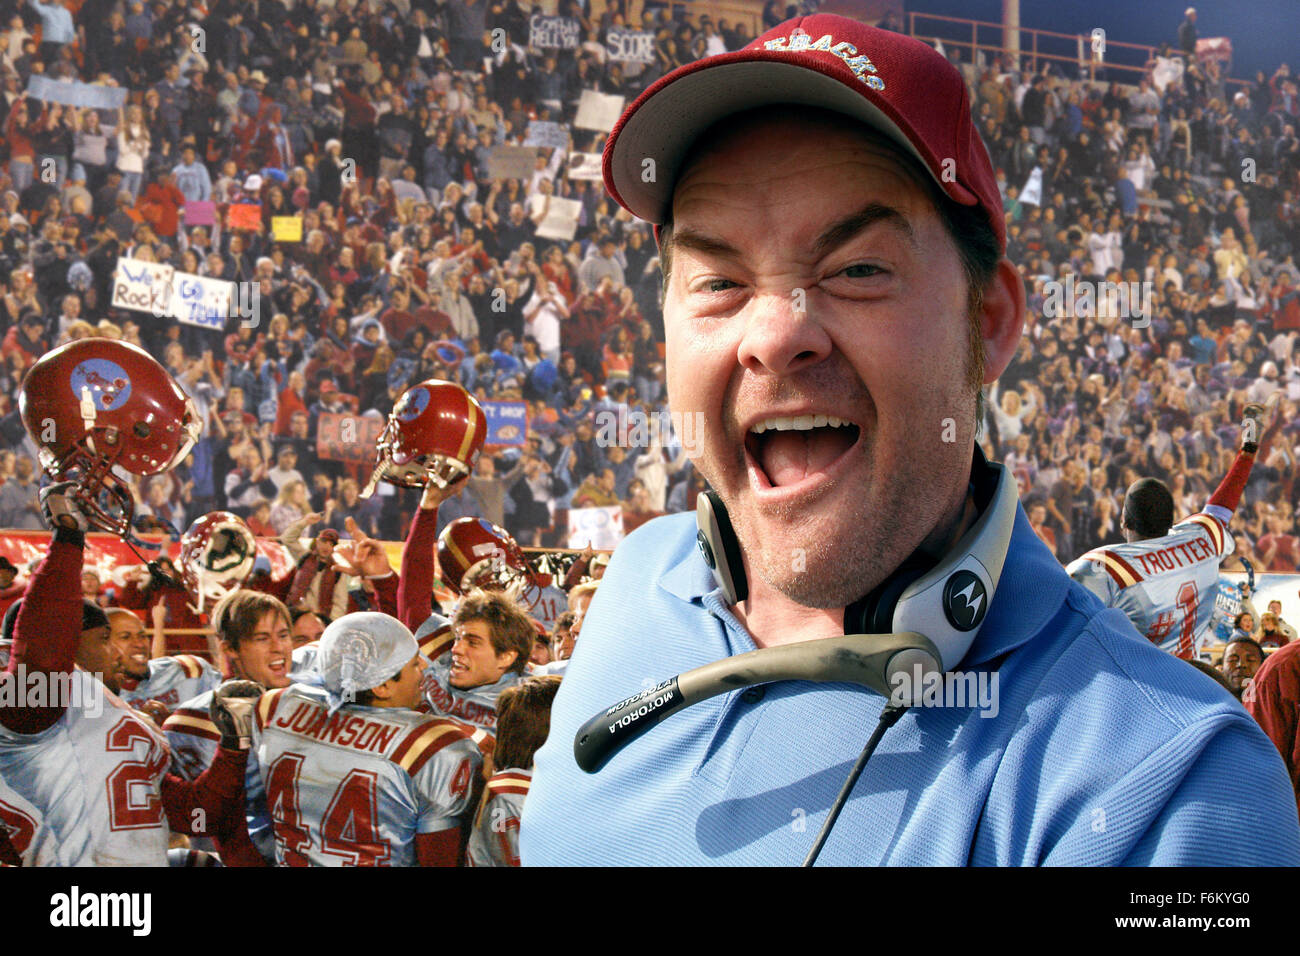 RELEASE DATE: Oct 19, 2007. TITLE: The Comebacks. STUDIO: Fox Atomic. PLOT: The Comebacks tells the story of an out-of-luck coach, Lambeau Fields (Koechner), who takes a rag-tag bunch of college misfits and drives them towards the football championships. In the process, this life-long loser discovers that he is a winner after all by redeeming himself, saving his relationship with his family and friends, and finding that there is indeed, no 'I' in 'team'! PICTURED: DAVID KOECHNER as Lambeau 'Coach' Fields. Stock Photo